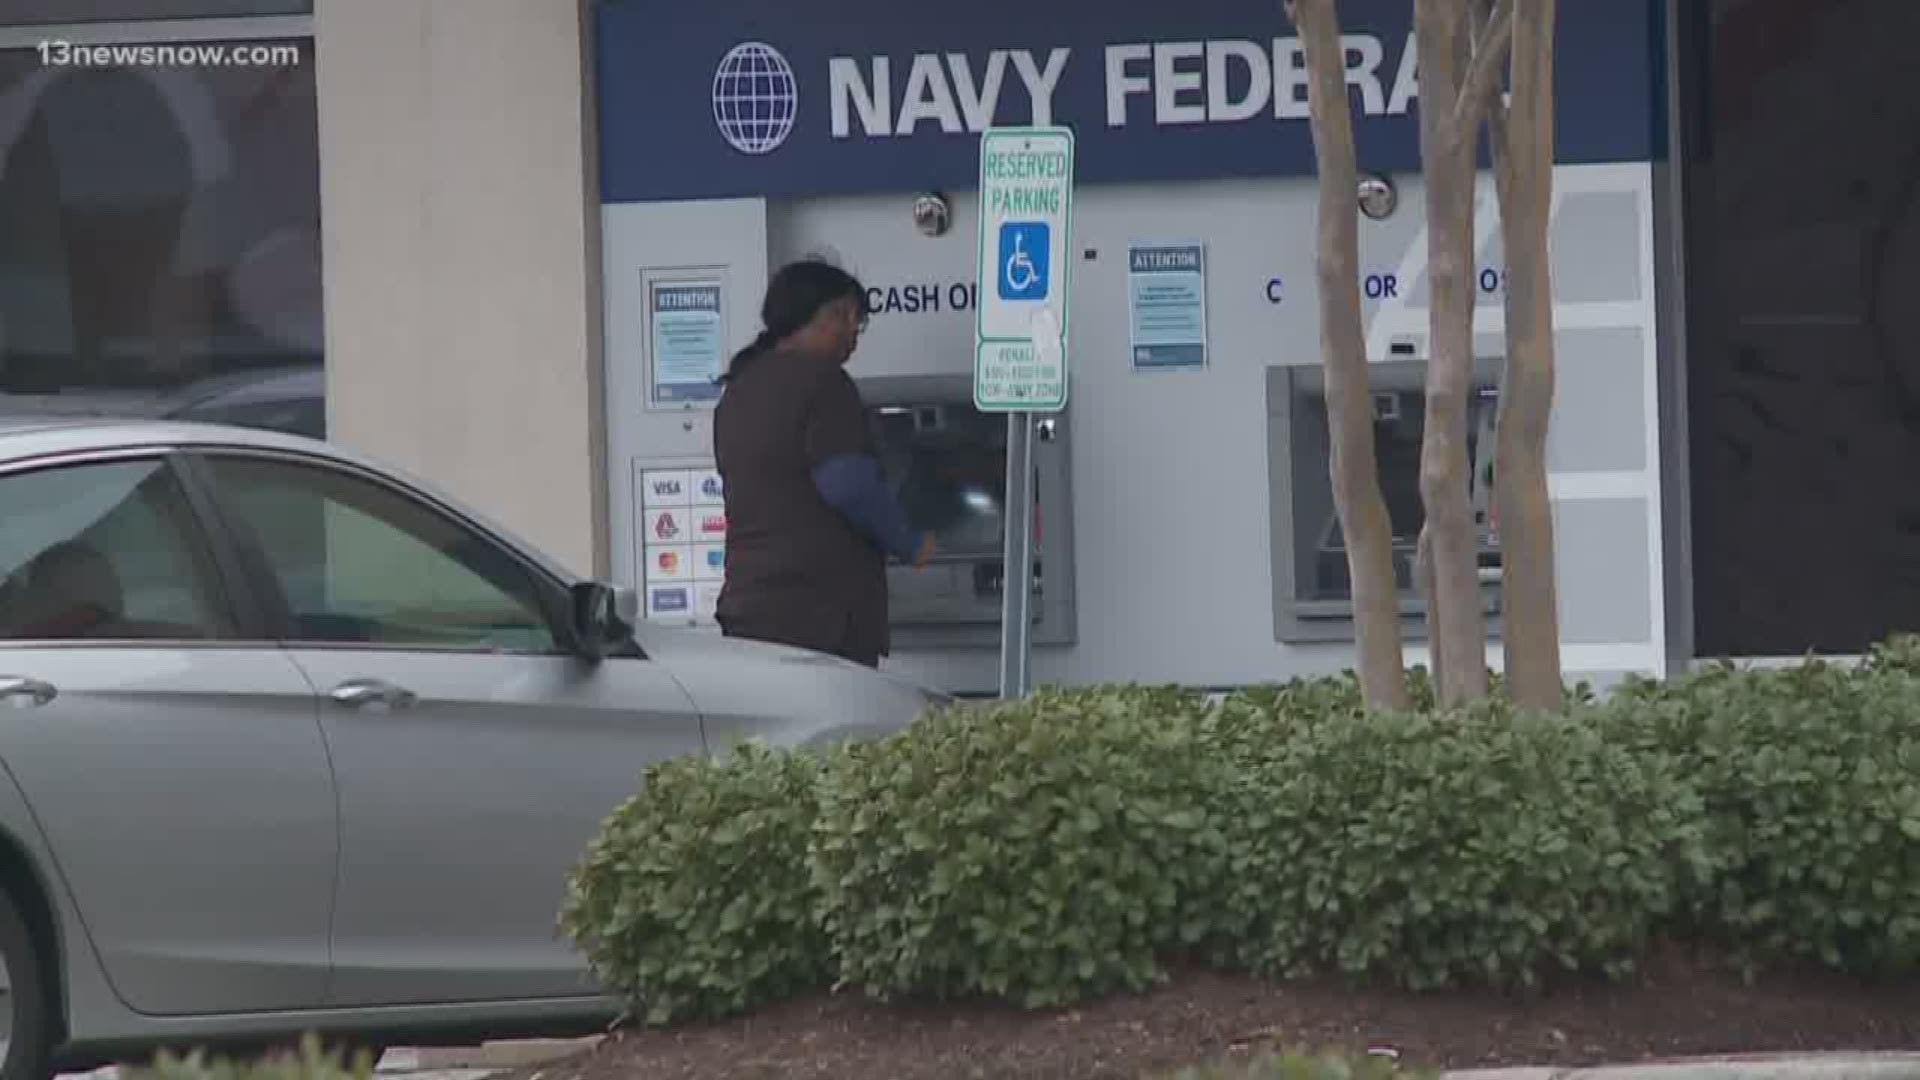 Navy Federal Credit Union said it resolved a problem with customers' delayed deposits. It was working to fix problems with online banking and other services.